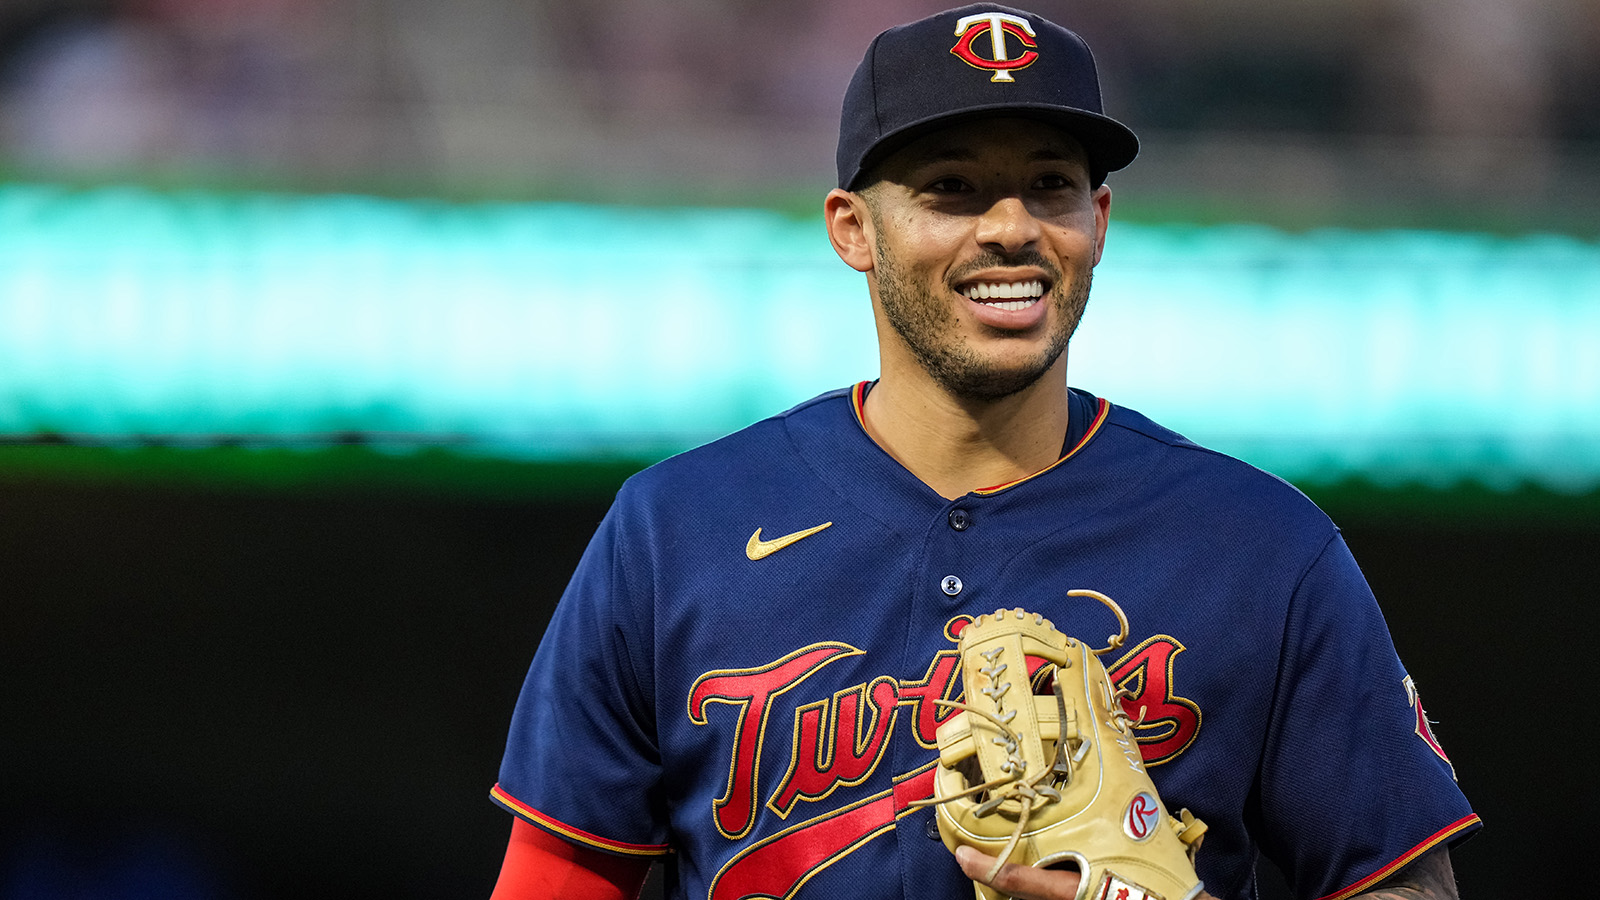 Carlos Correa Is Introduced by Minnesota Twins - The New York Times